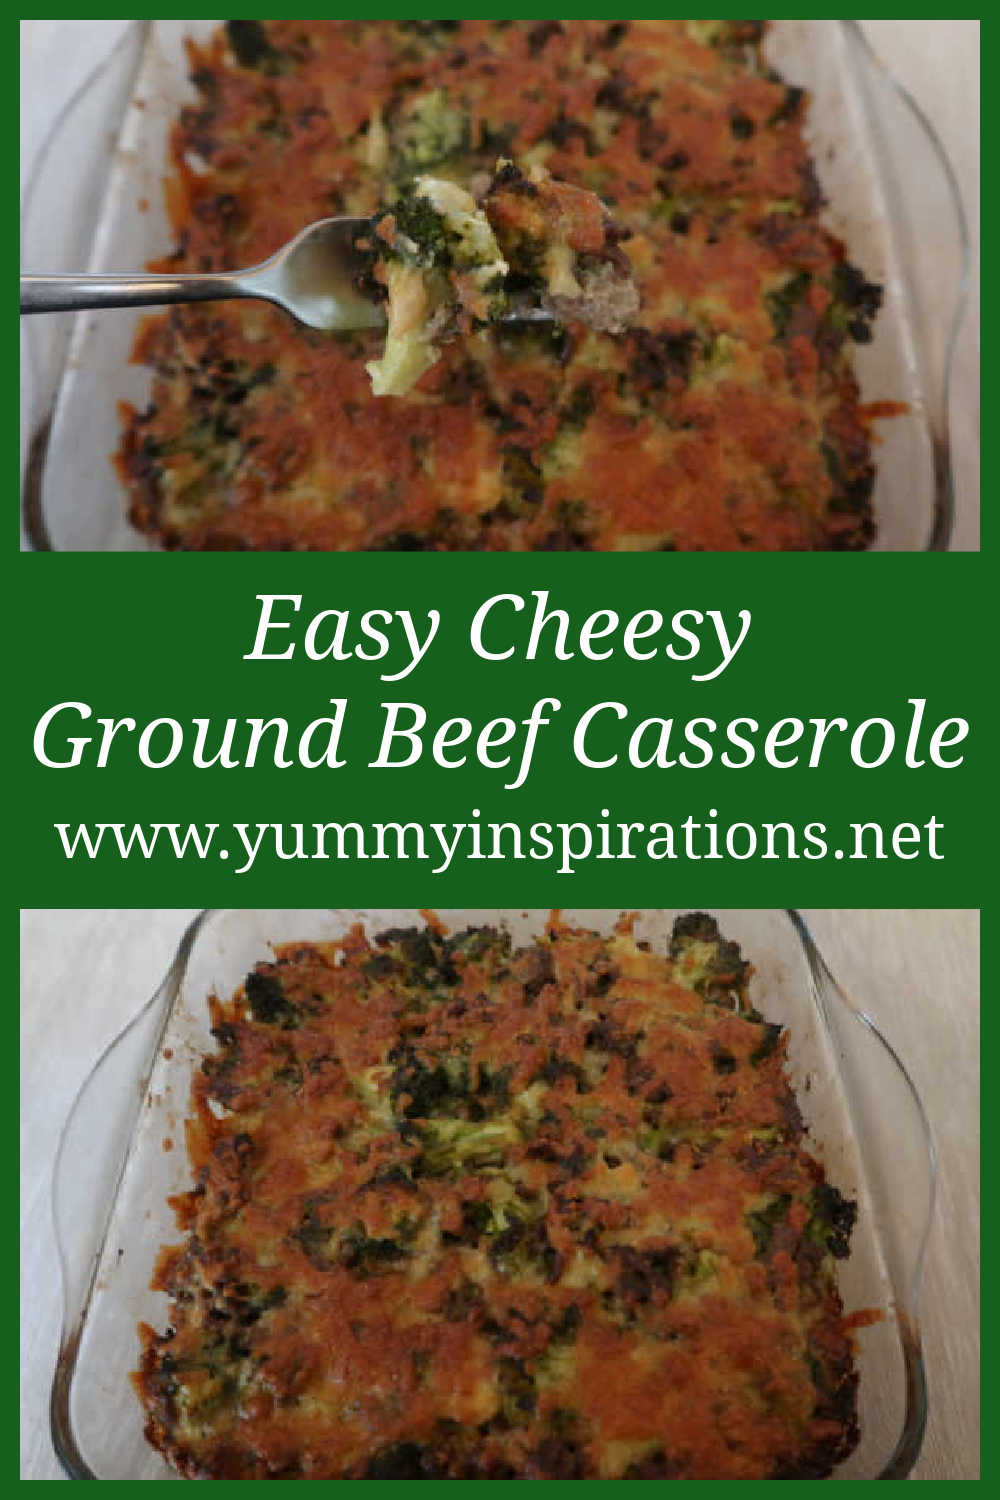 Easy Ground Beef Casserole Recipe - How to make a Hearty and Cheesy Family Weeknight Dinner with broccoli - with the full video tutorial.